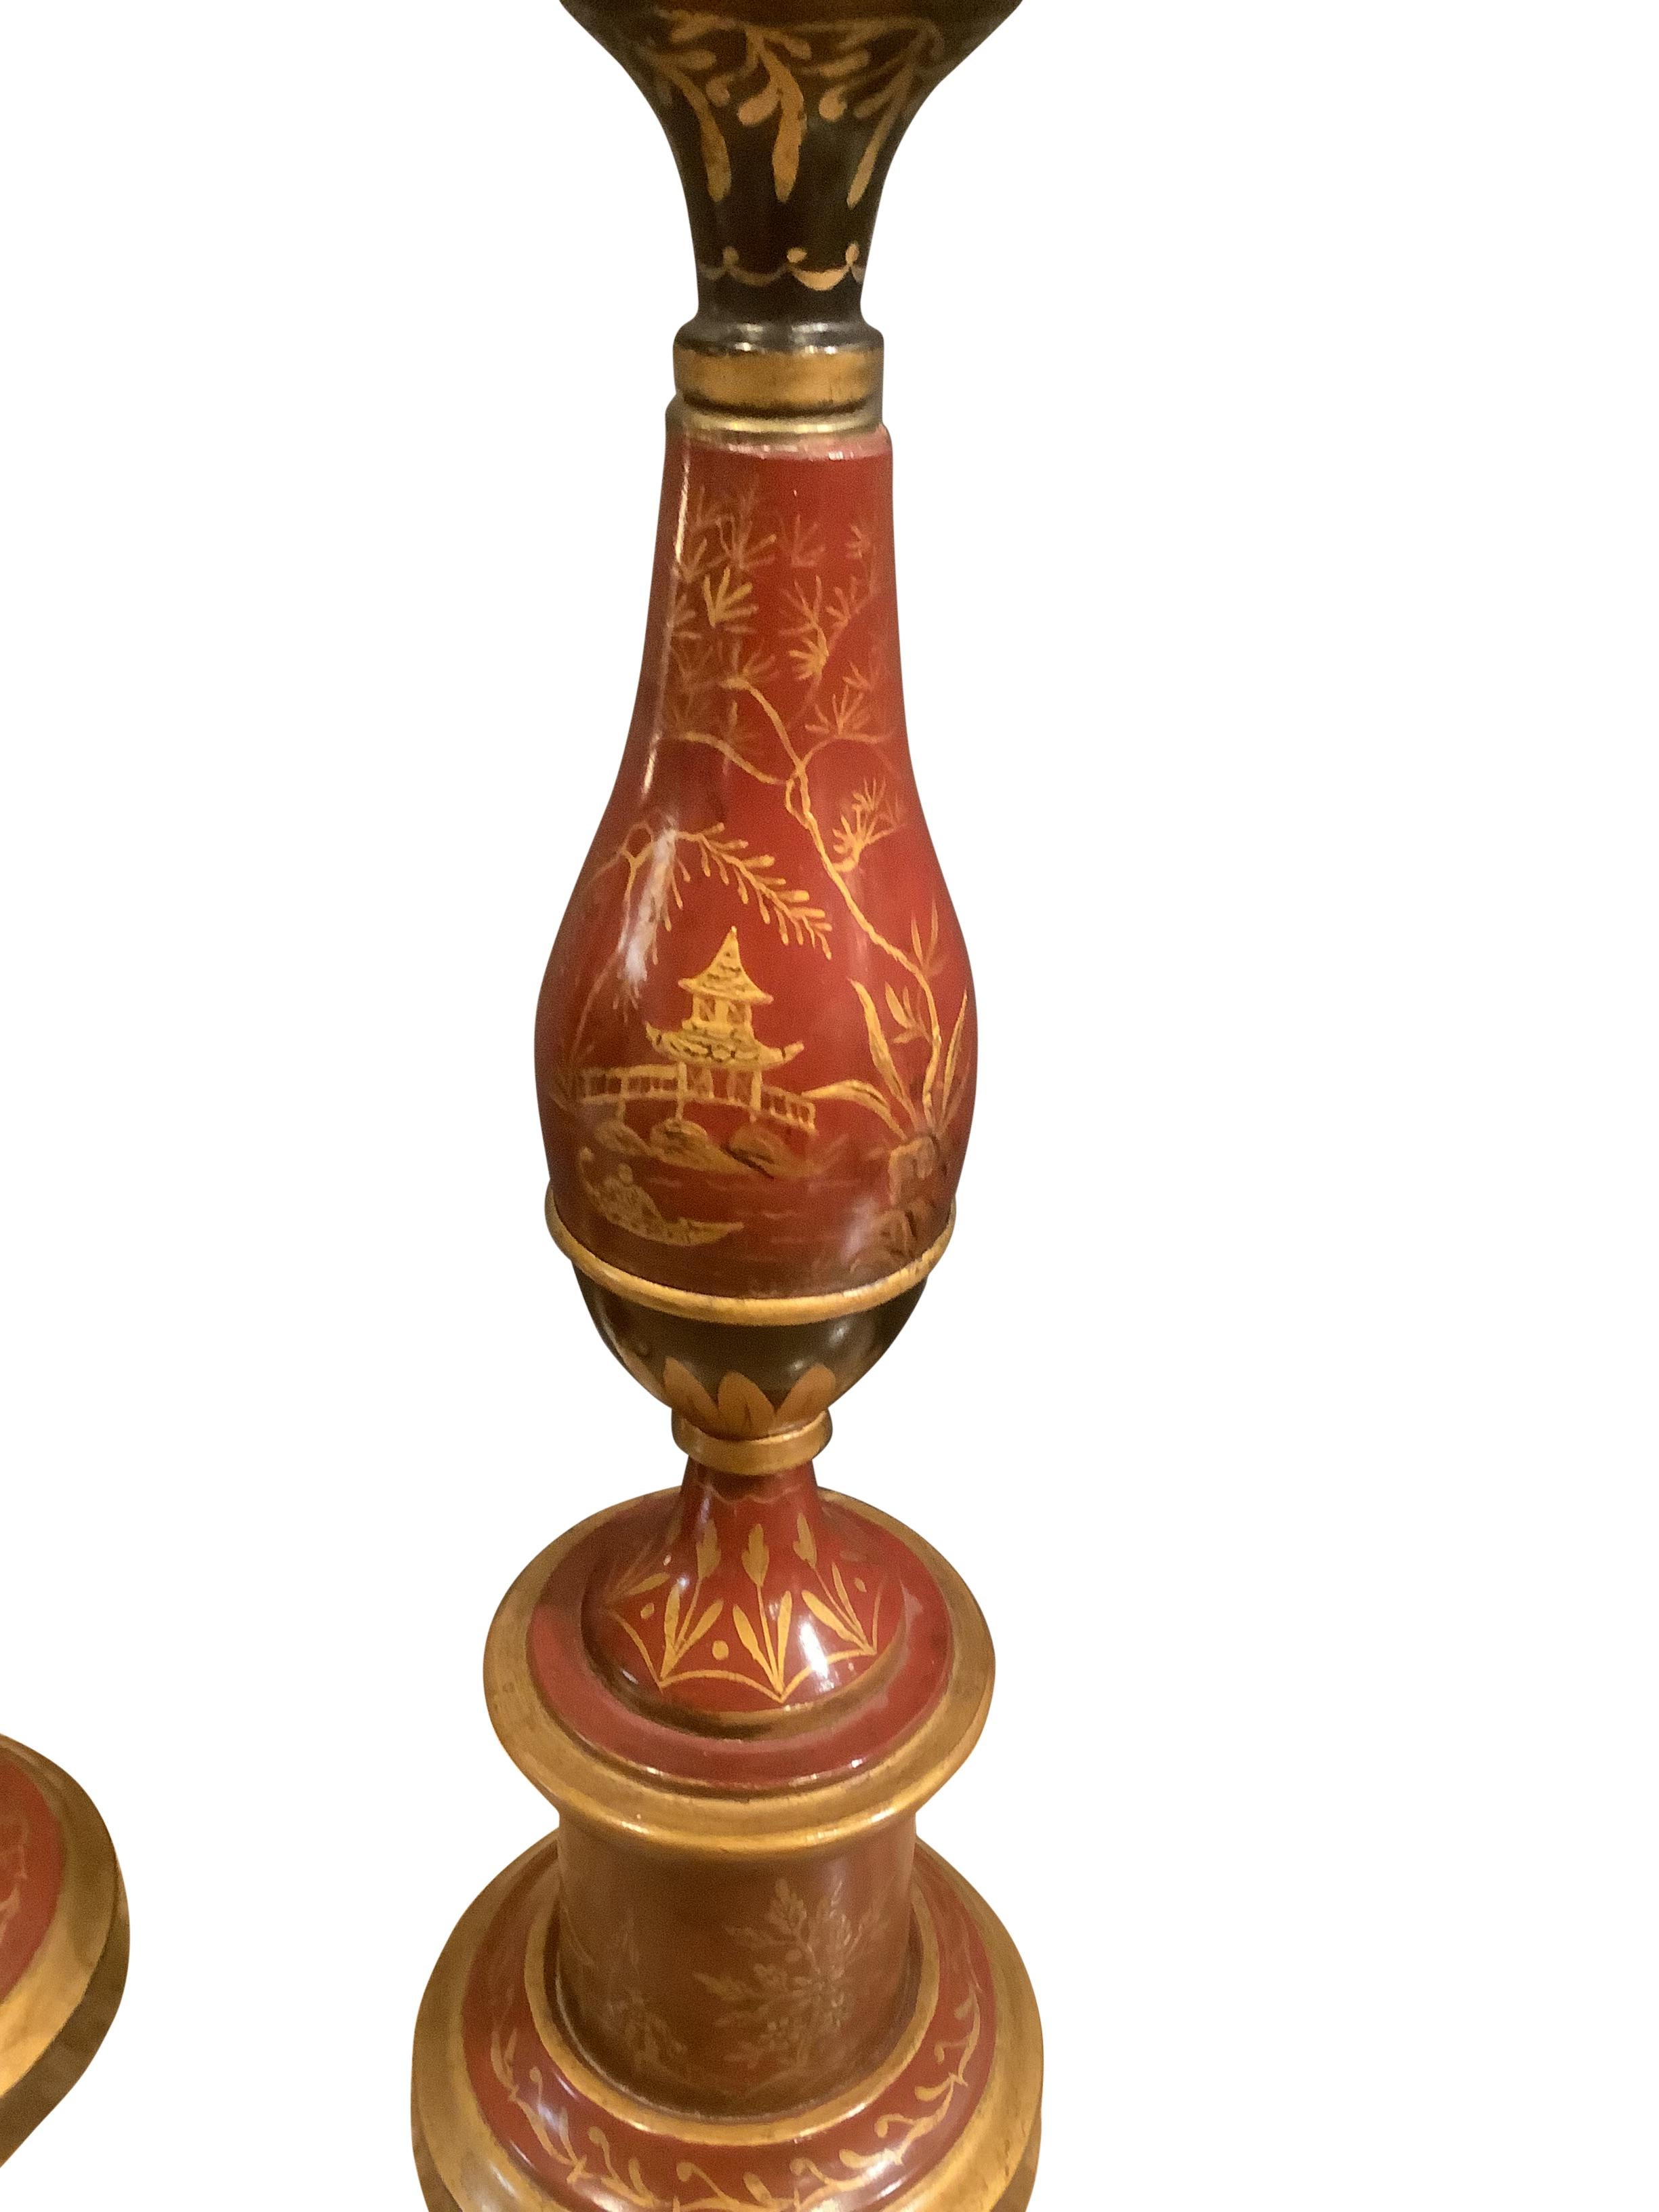 Gorgeous pair of French Chinoiserie decorated tole lamps with raised painted scenic and gilt decorations. Baluster form body on a round plinth base. The shade rest is adjustable to accommodate different size shades. Exceptional quality.